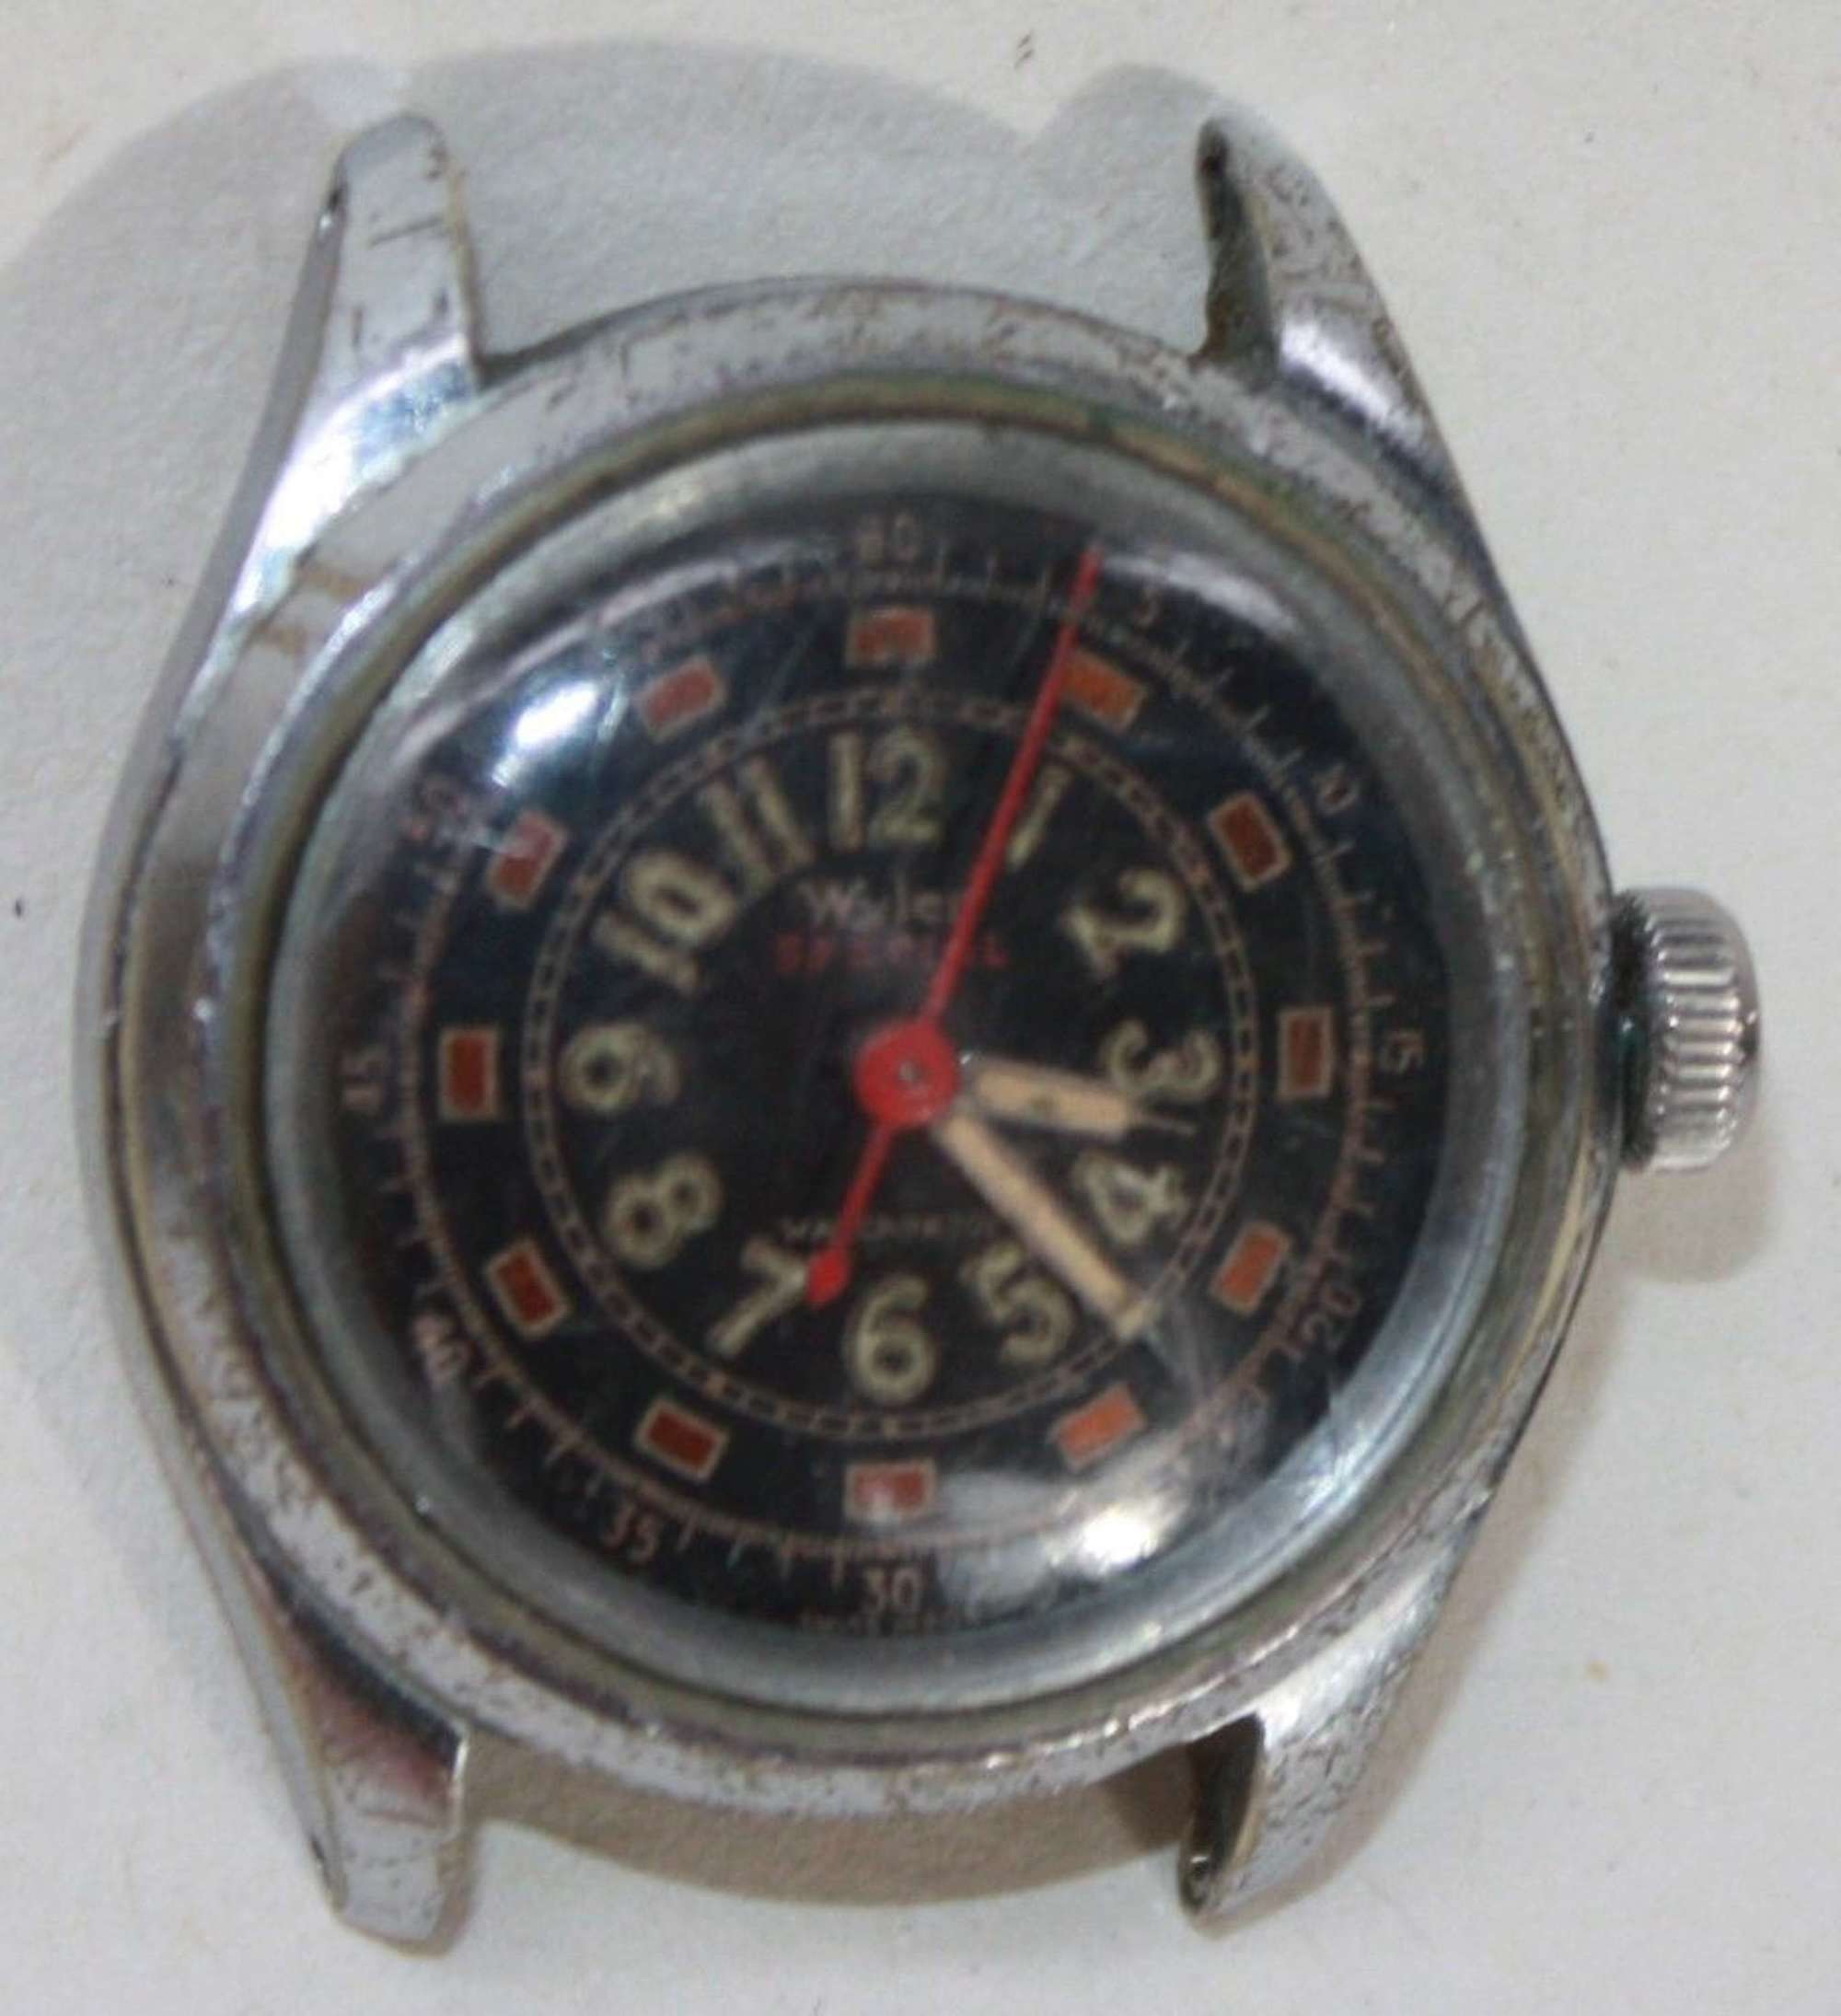 A rare WWII Wyler special army time peace wrist watch working example